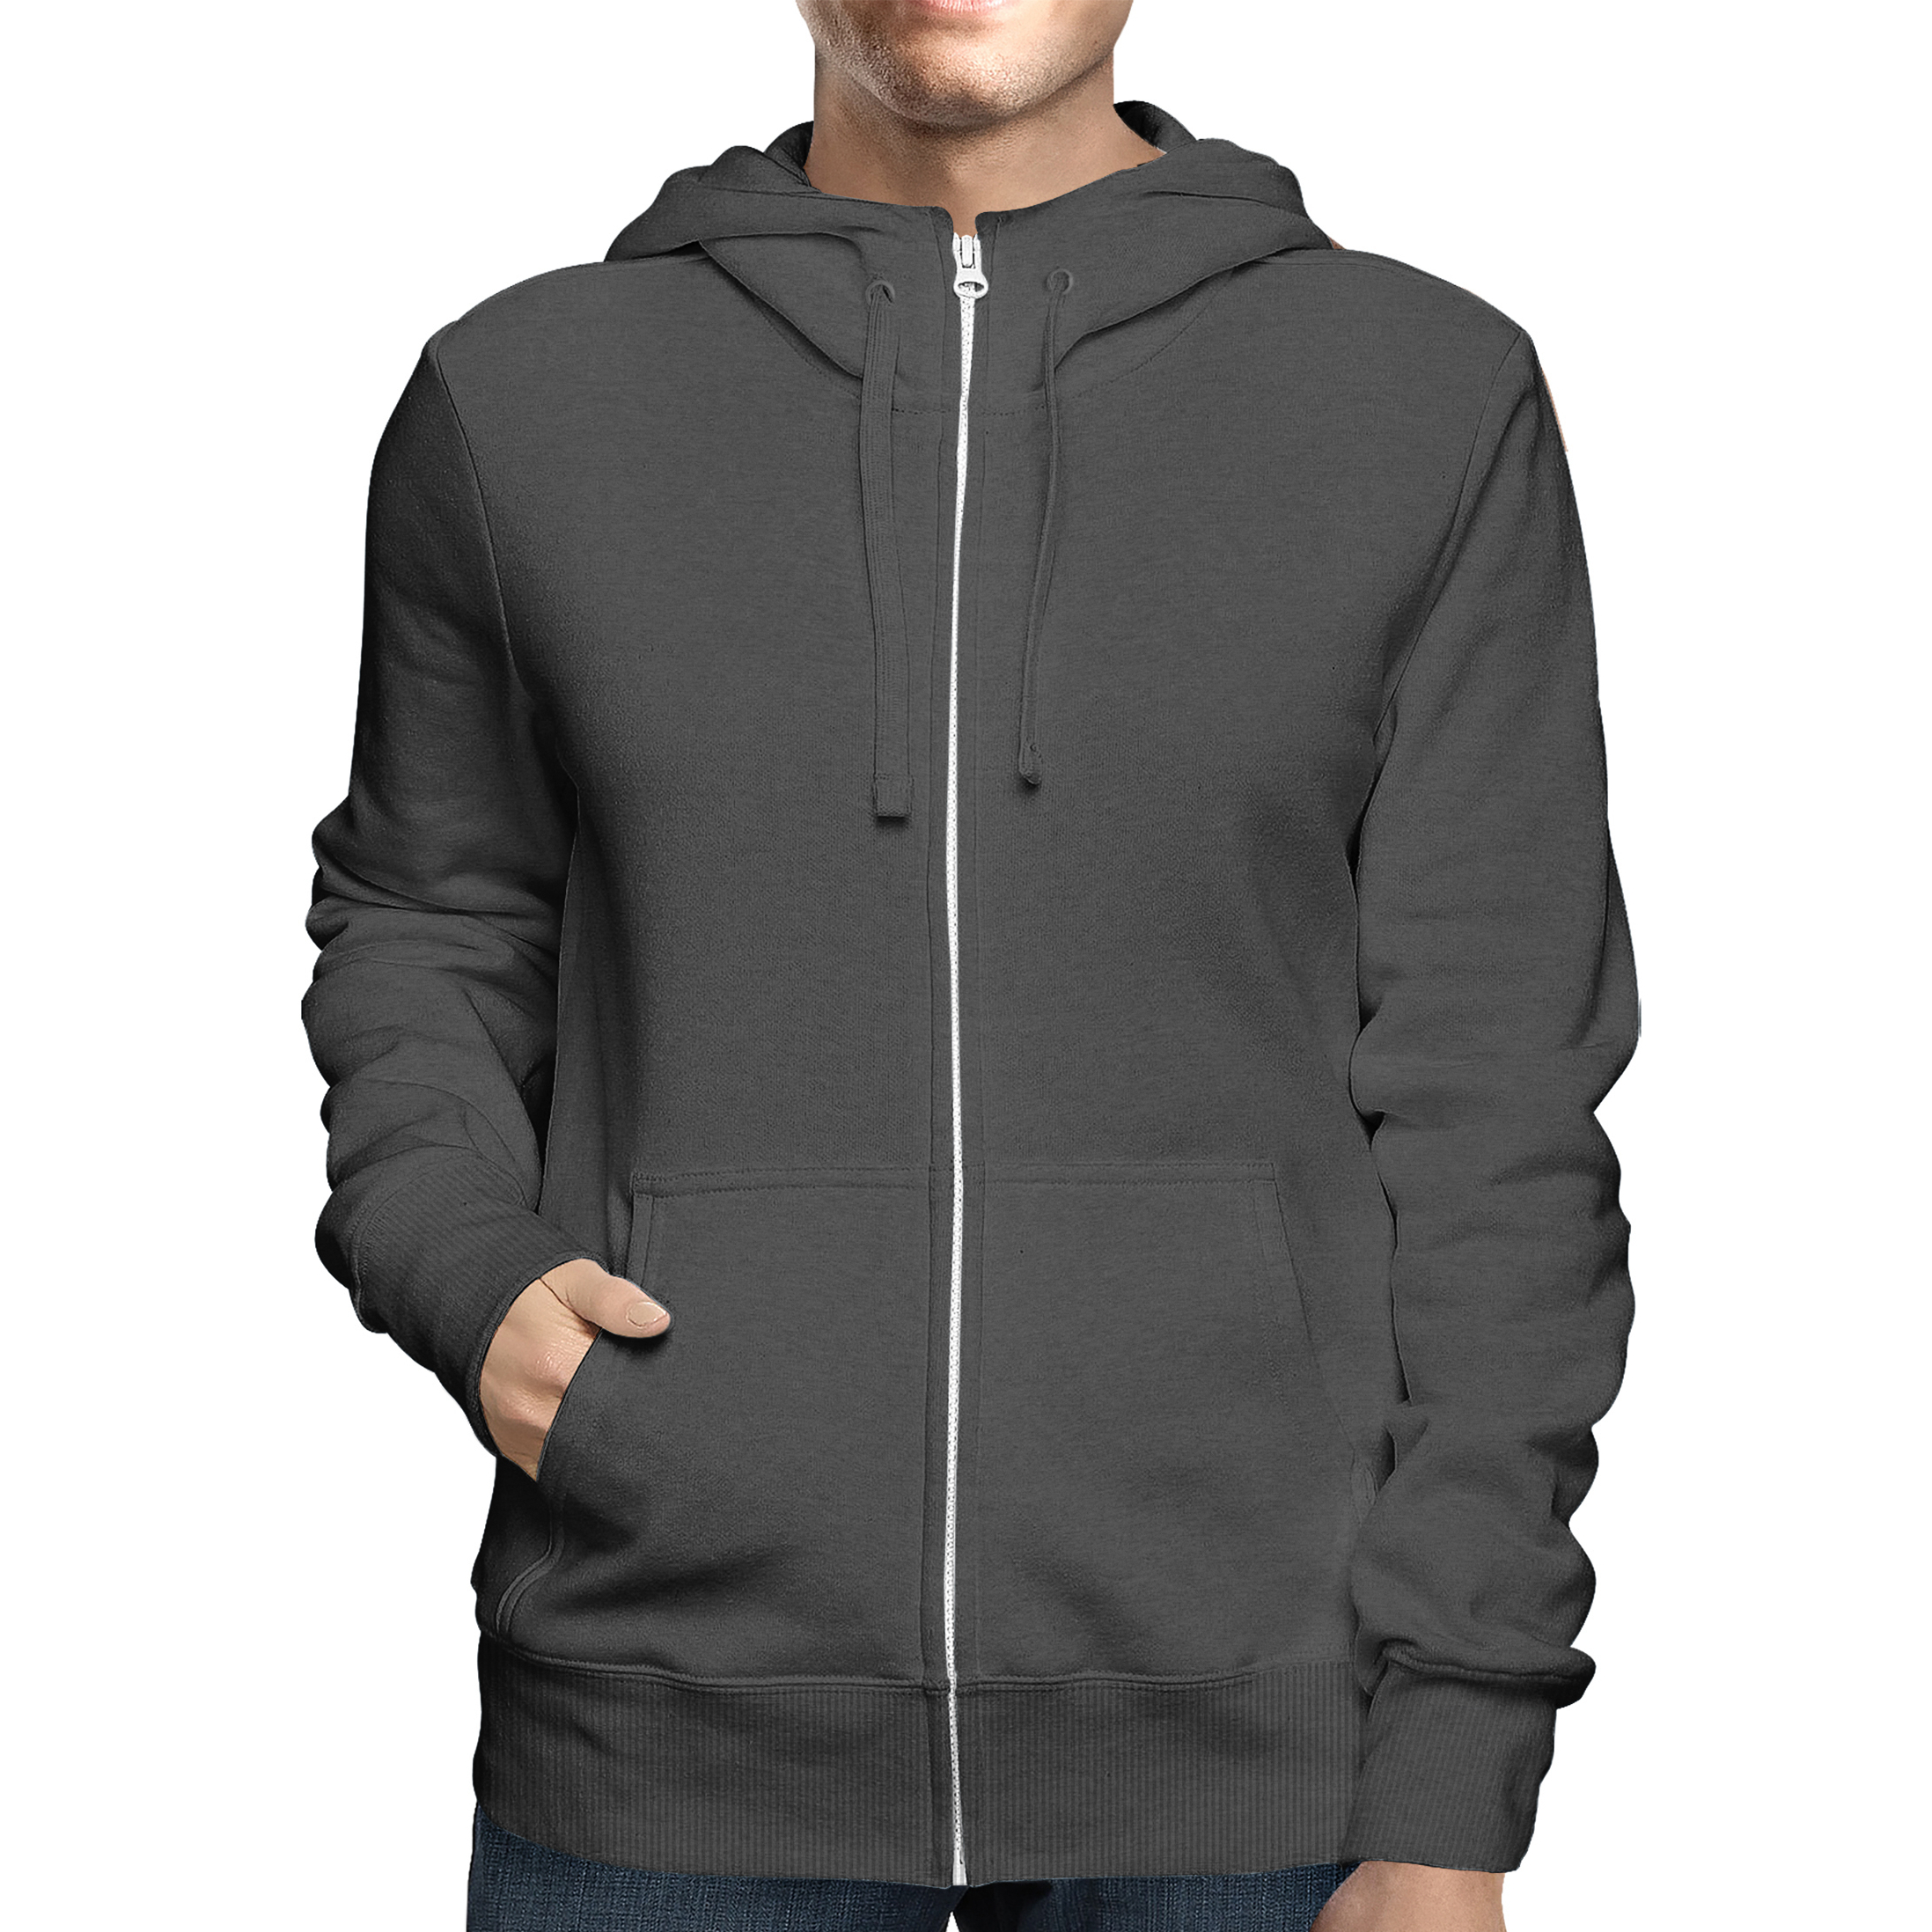 2-Pack: Men's Full Zip Up Fleece-Lined Hoodie Sweatshirt (Big & Tall Size Available) - Charcoal, 4x-large